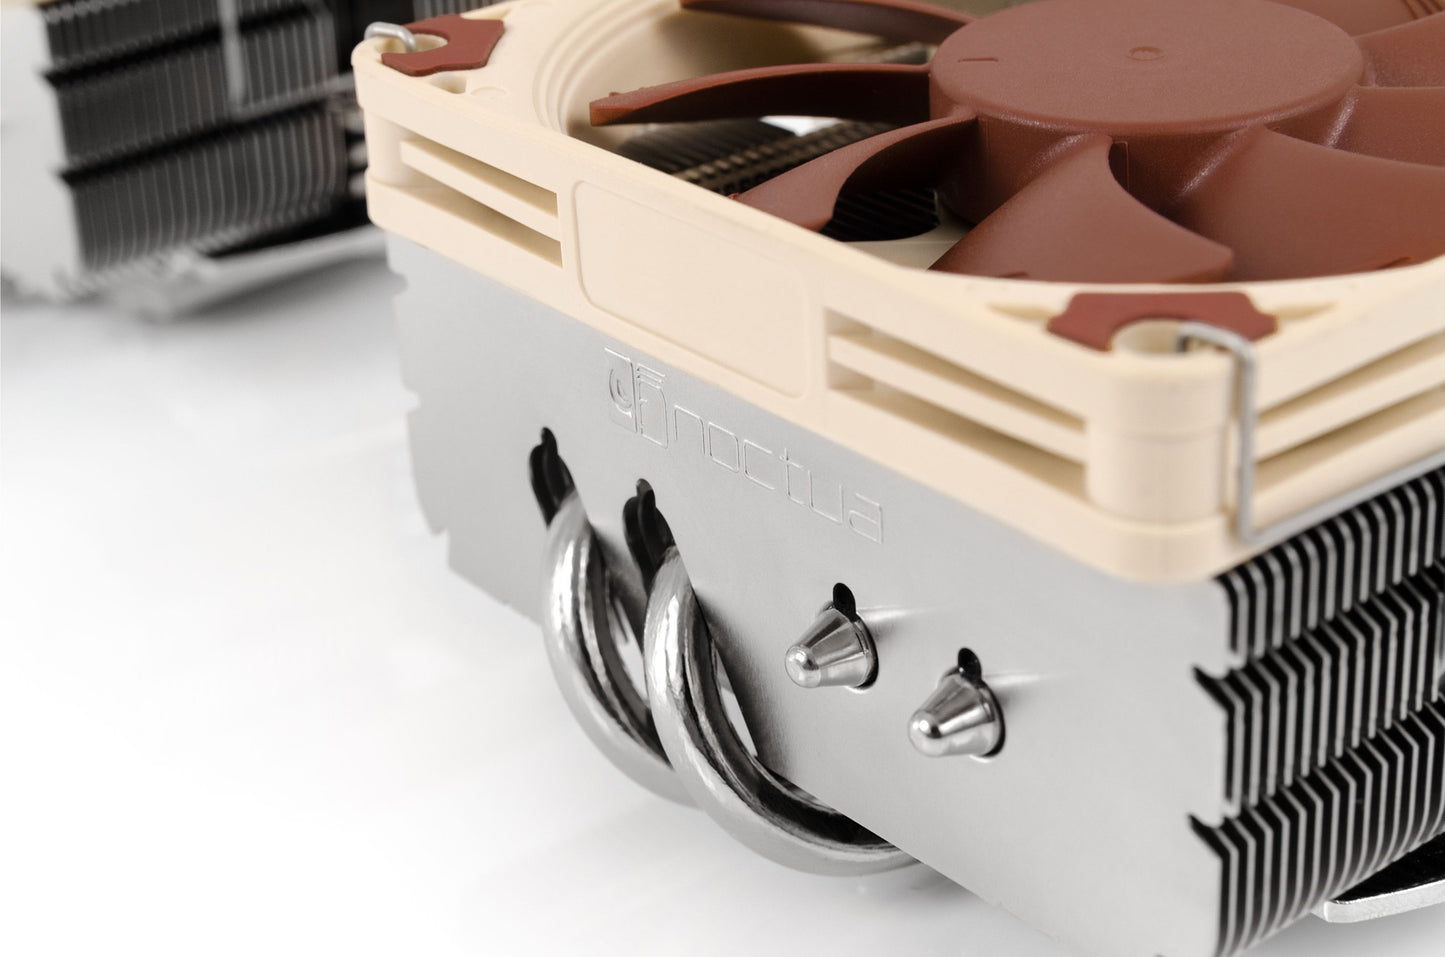 Noctua NH-L9x65 highly compact, quiet low-profile cooler